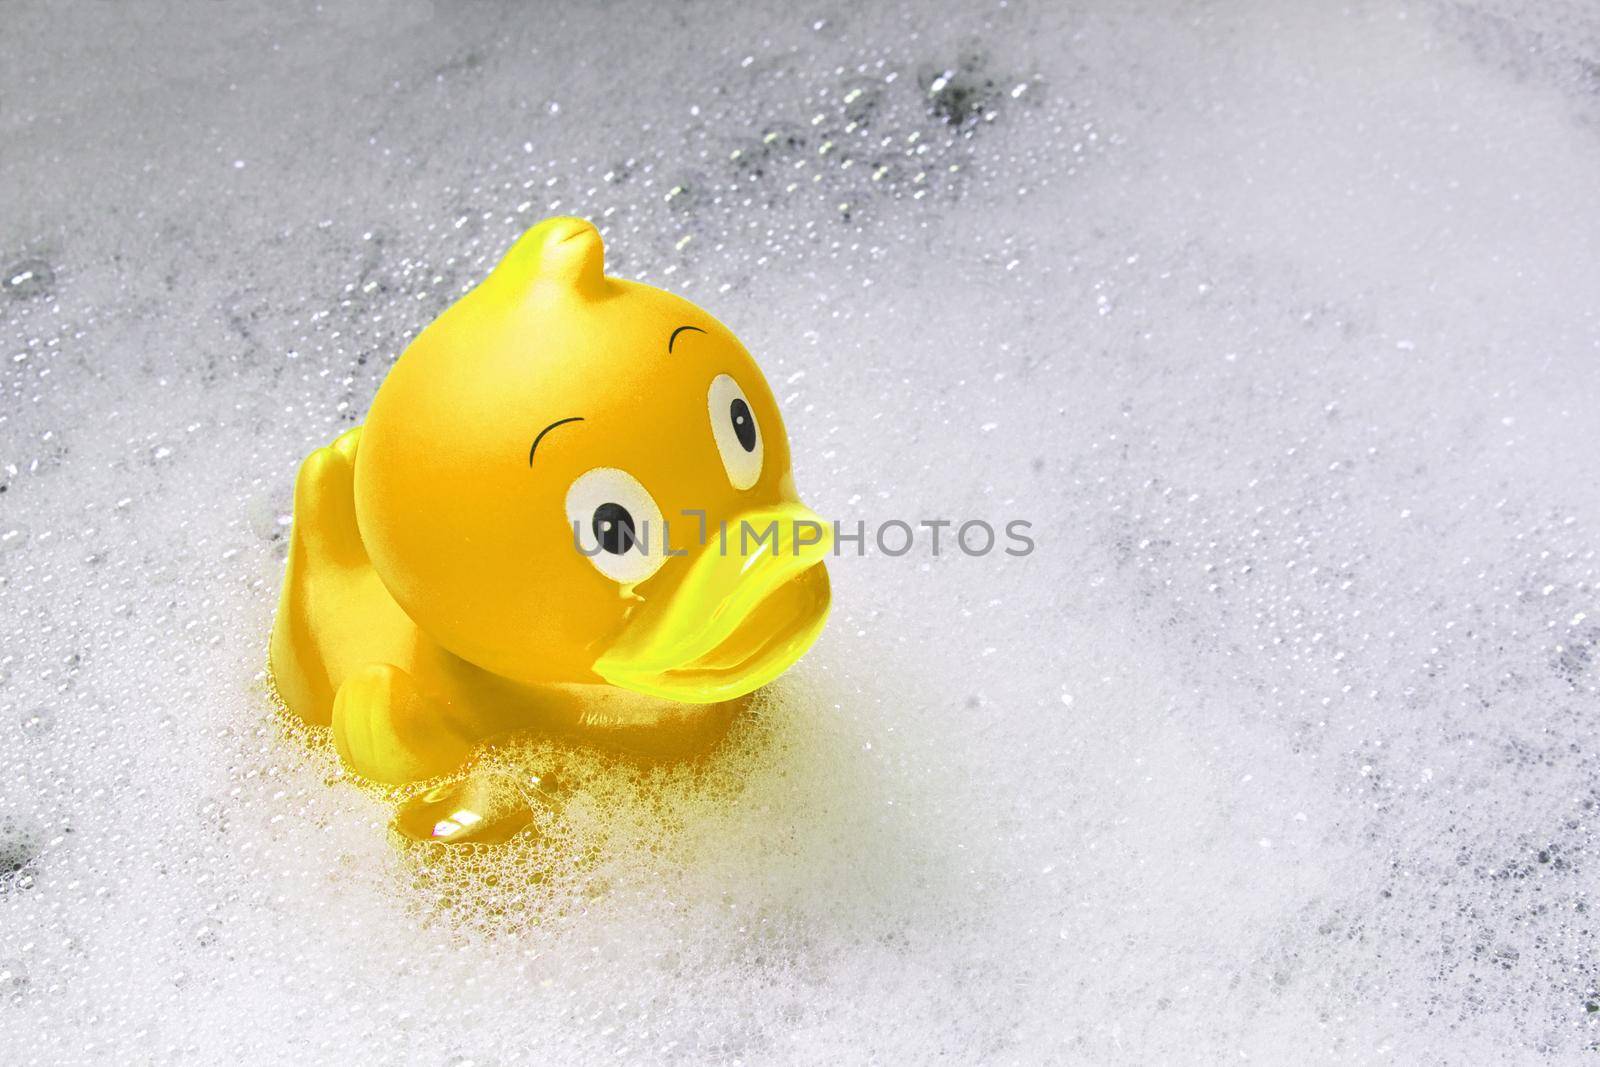 Yellow toy rubber duck among the soap bubbles in the bath